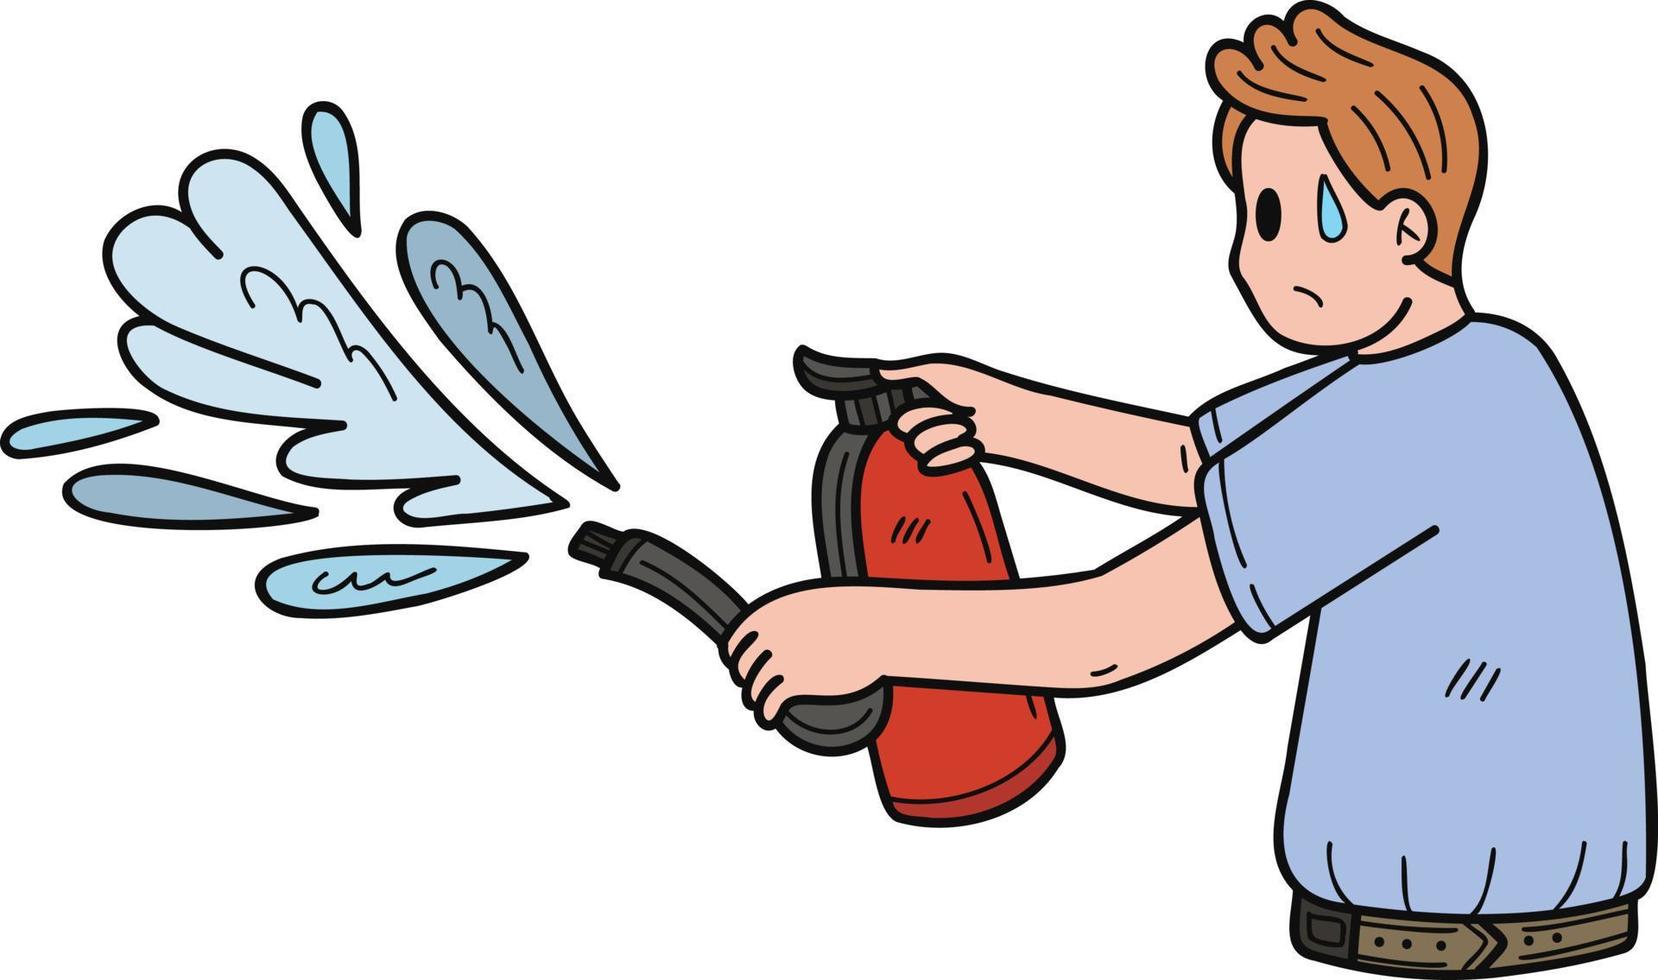 business man extinguishing fire illustration in doodle style vector